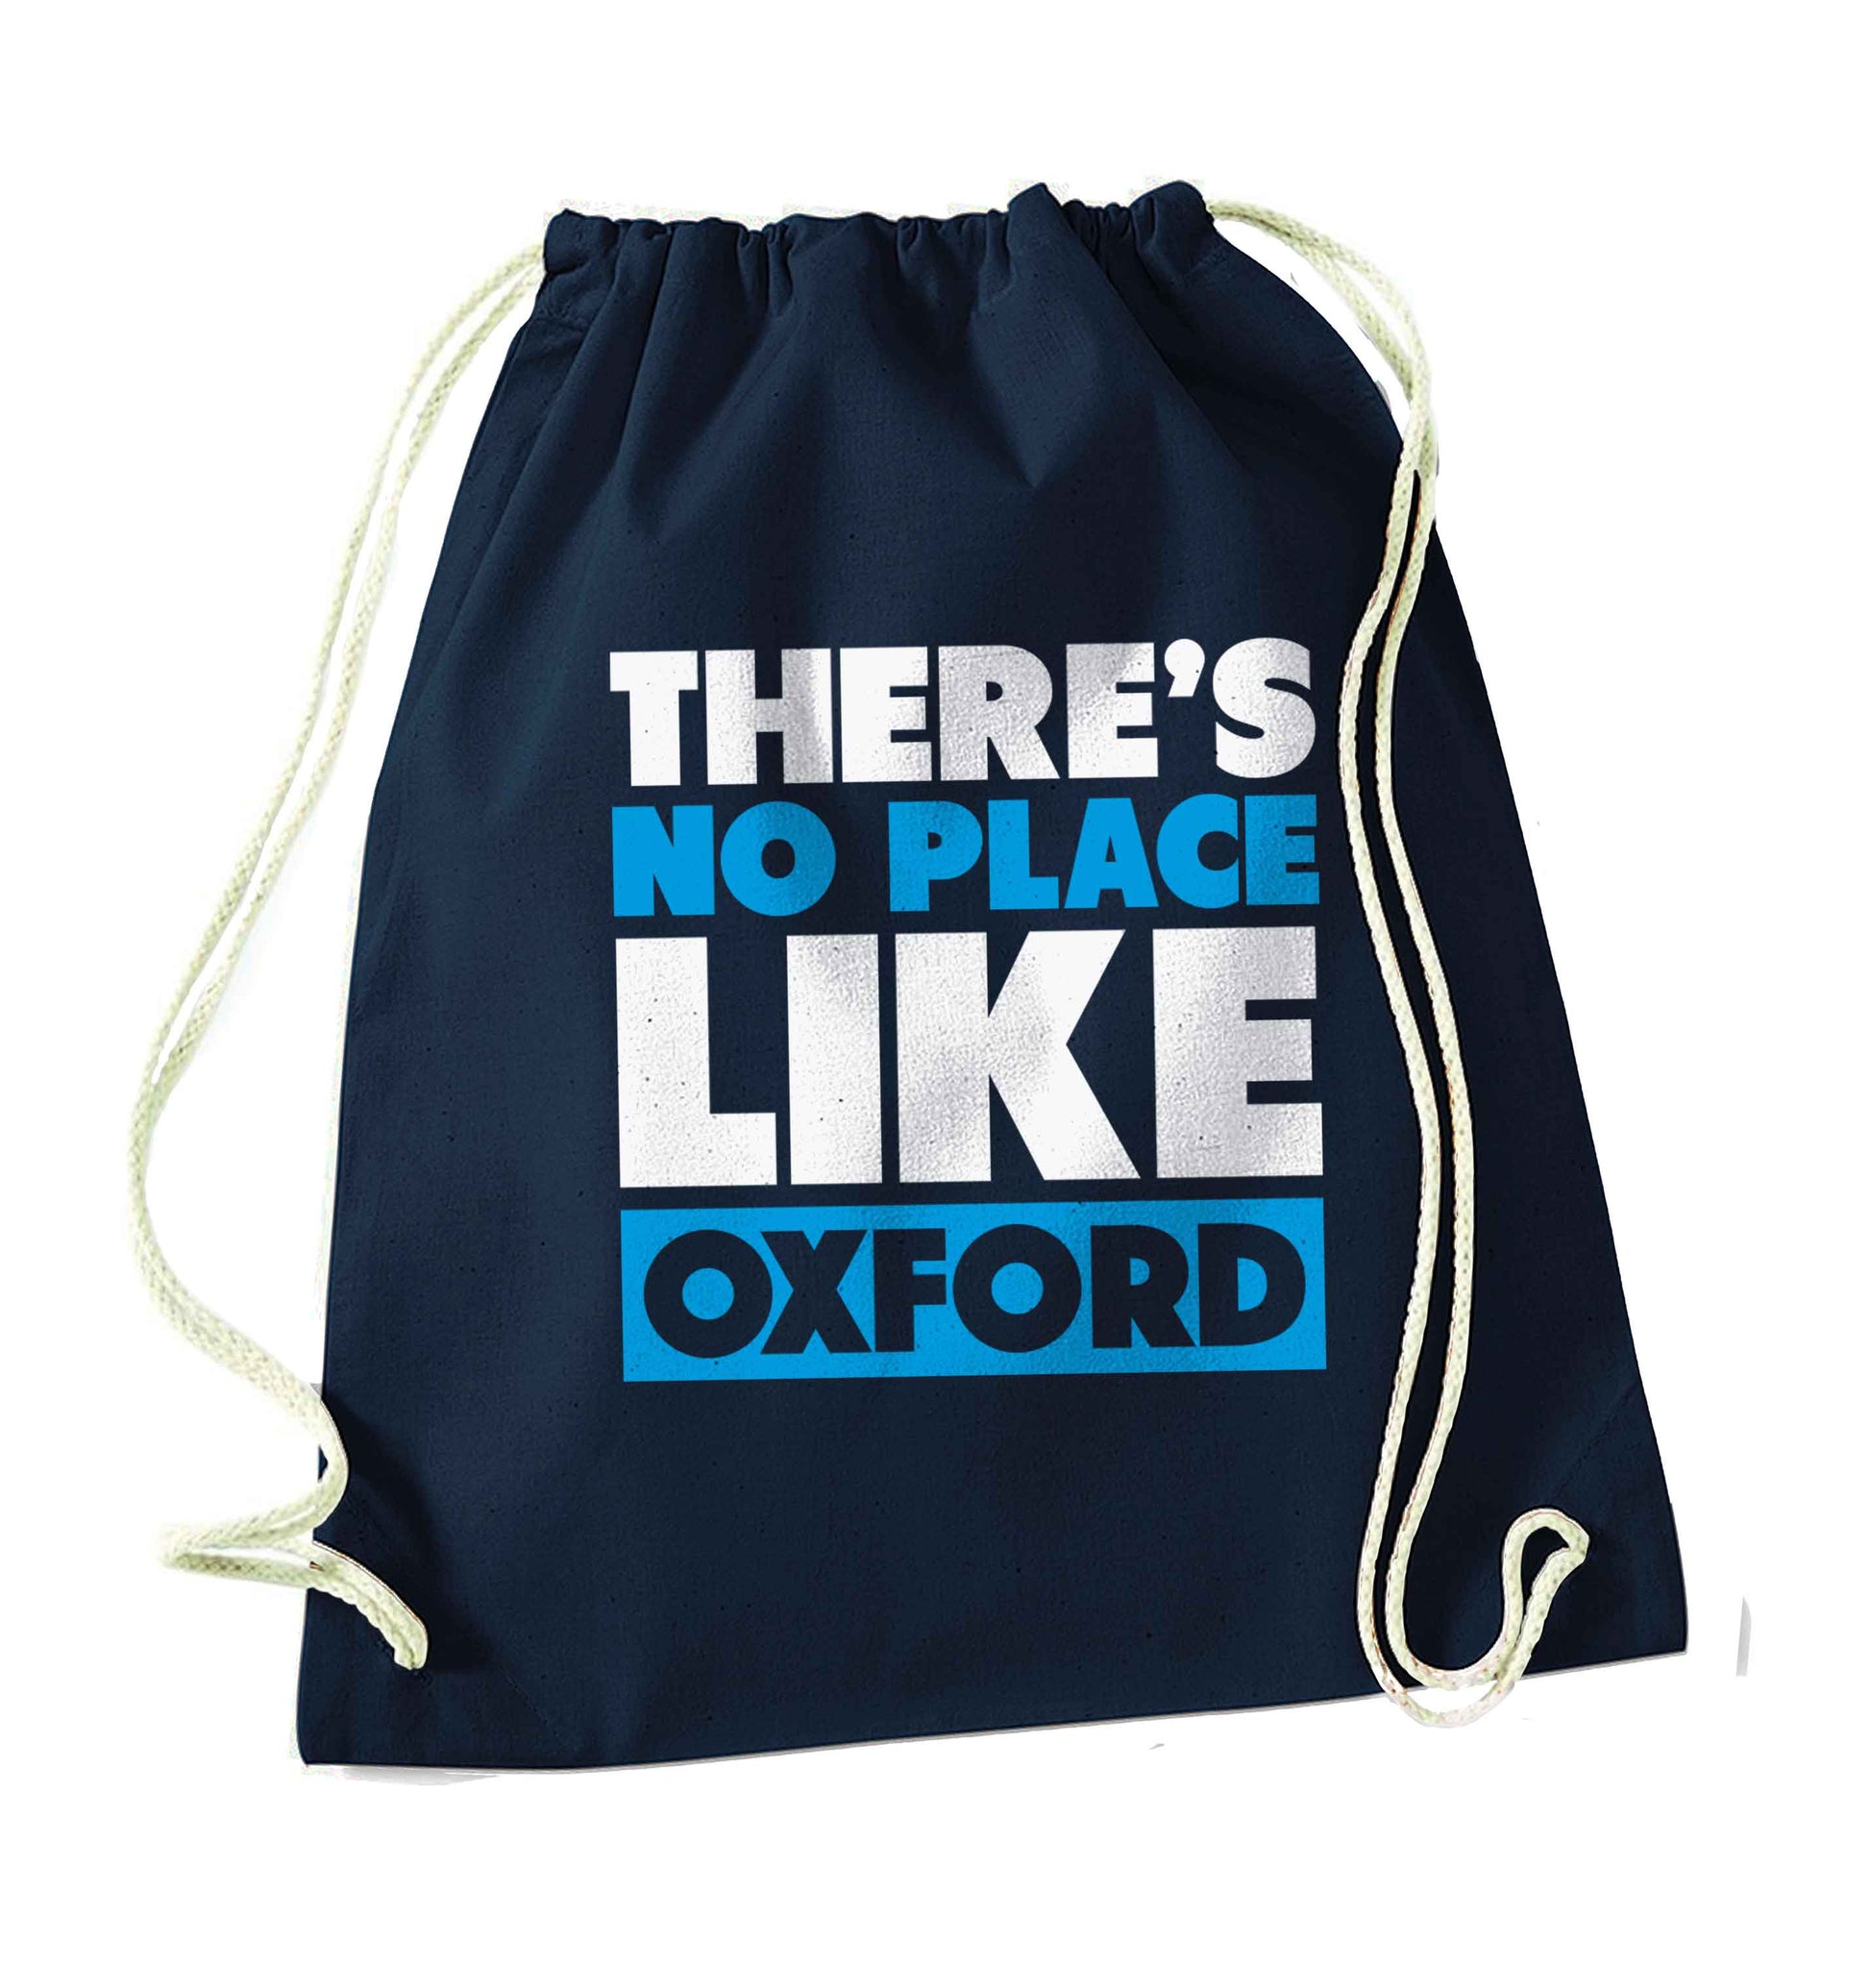 There's no place like Oxford navy drawstring bag